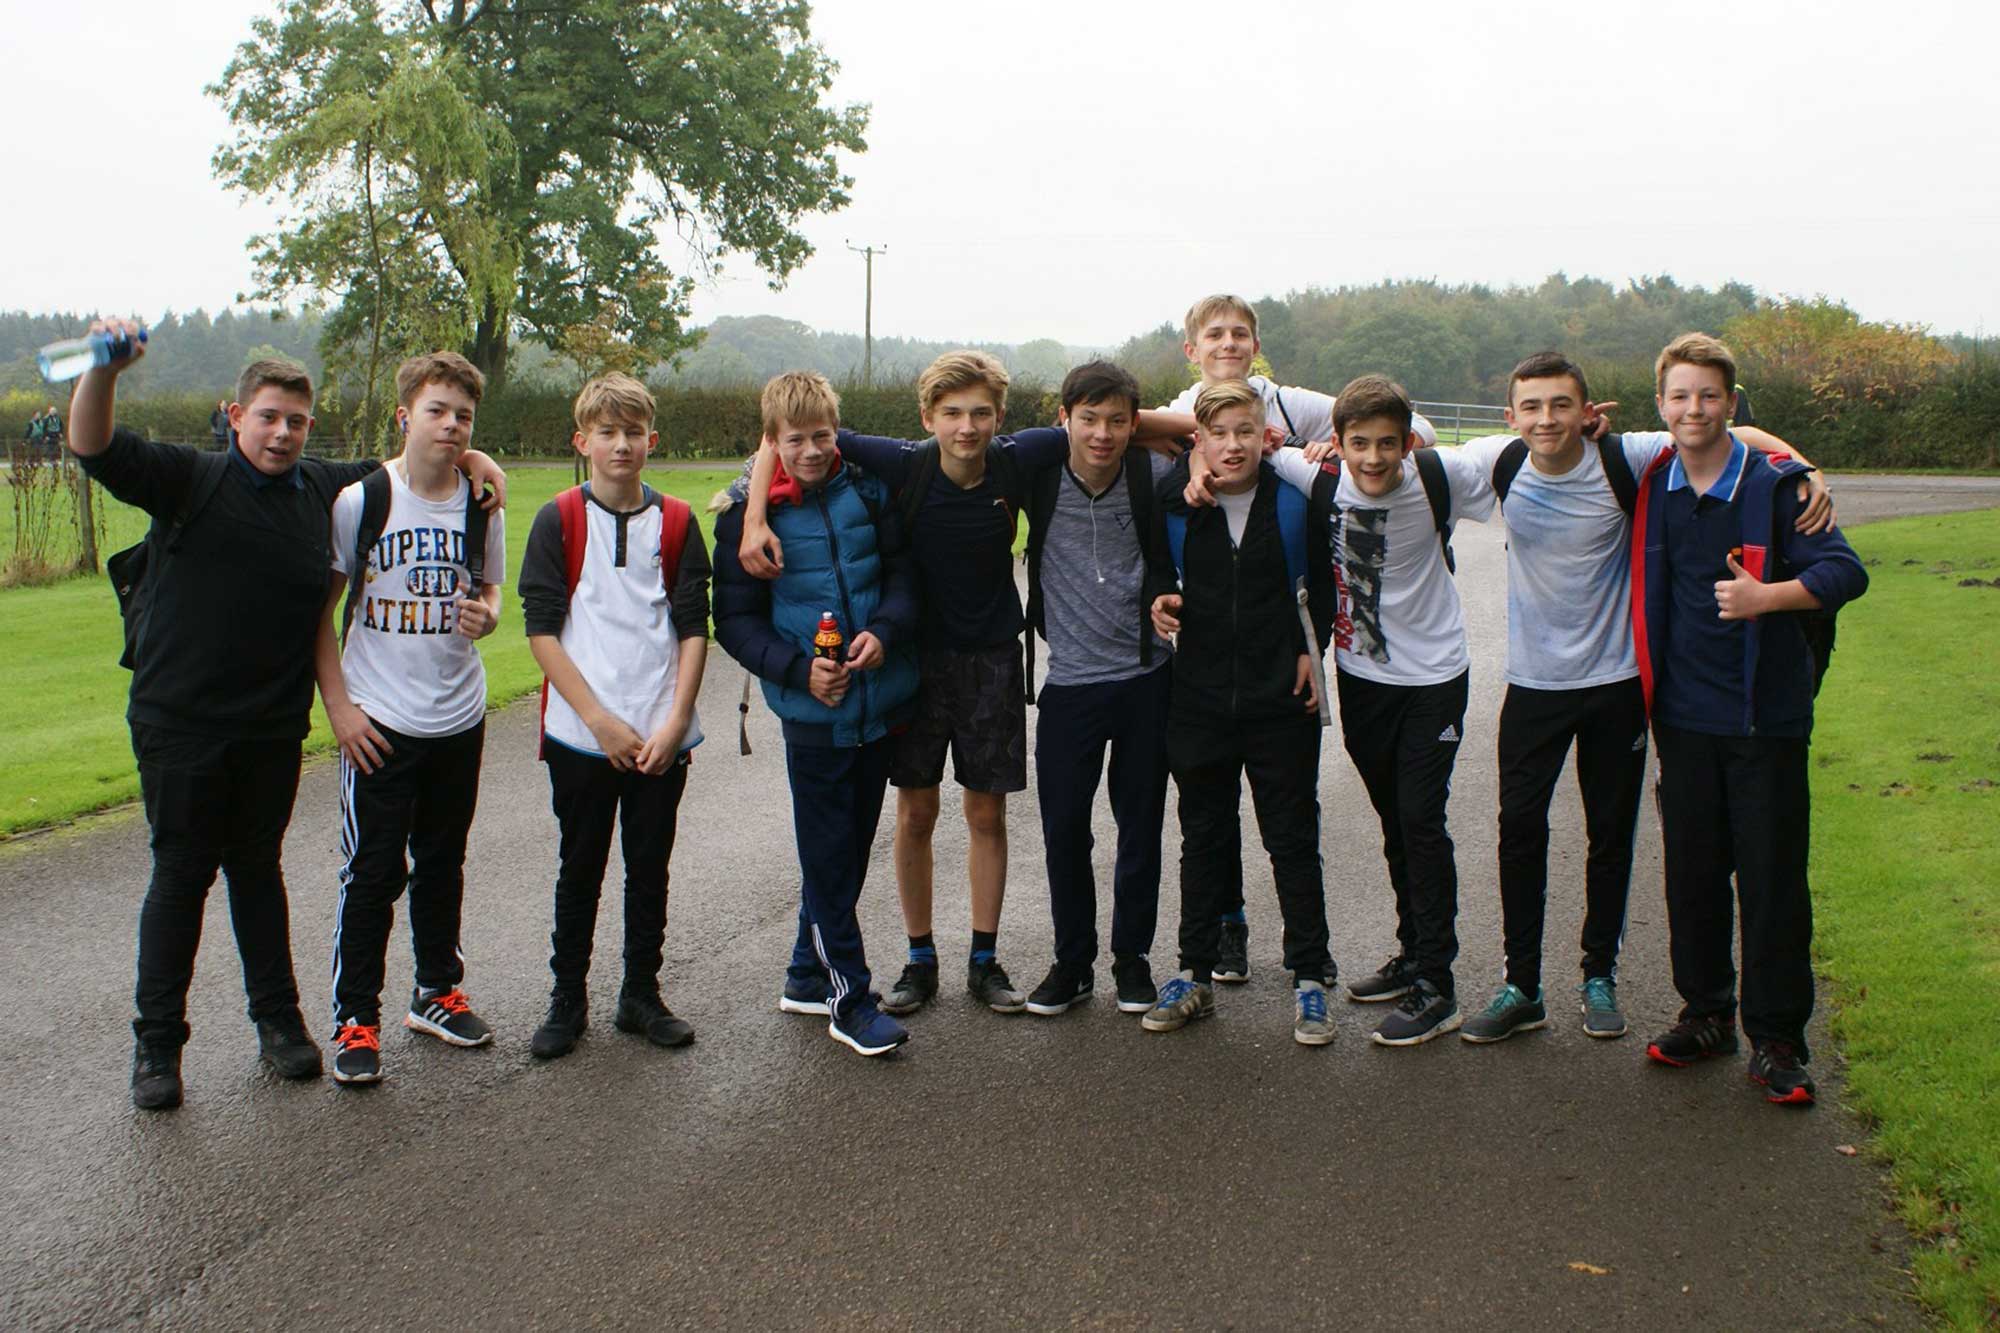 Students on the Rossett School Sponsored Walk, covering 20km in one day to raise money for good causes